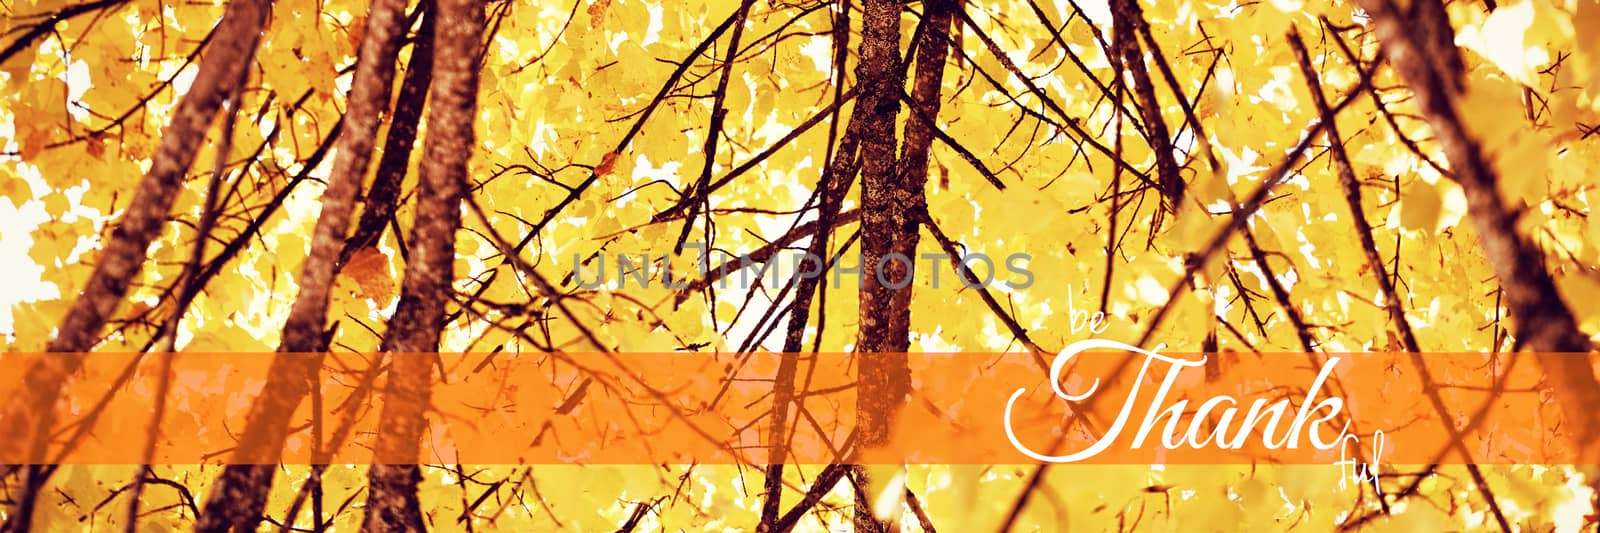 Digital image of happy thanksgiving day text greeting against  low angle view of tree against blue sky